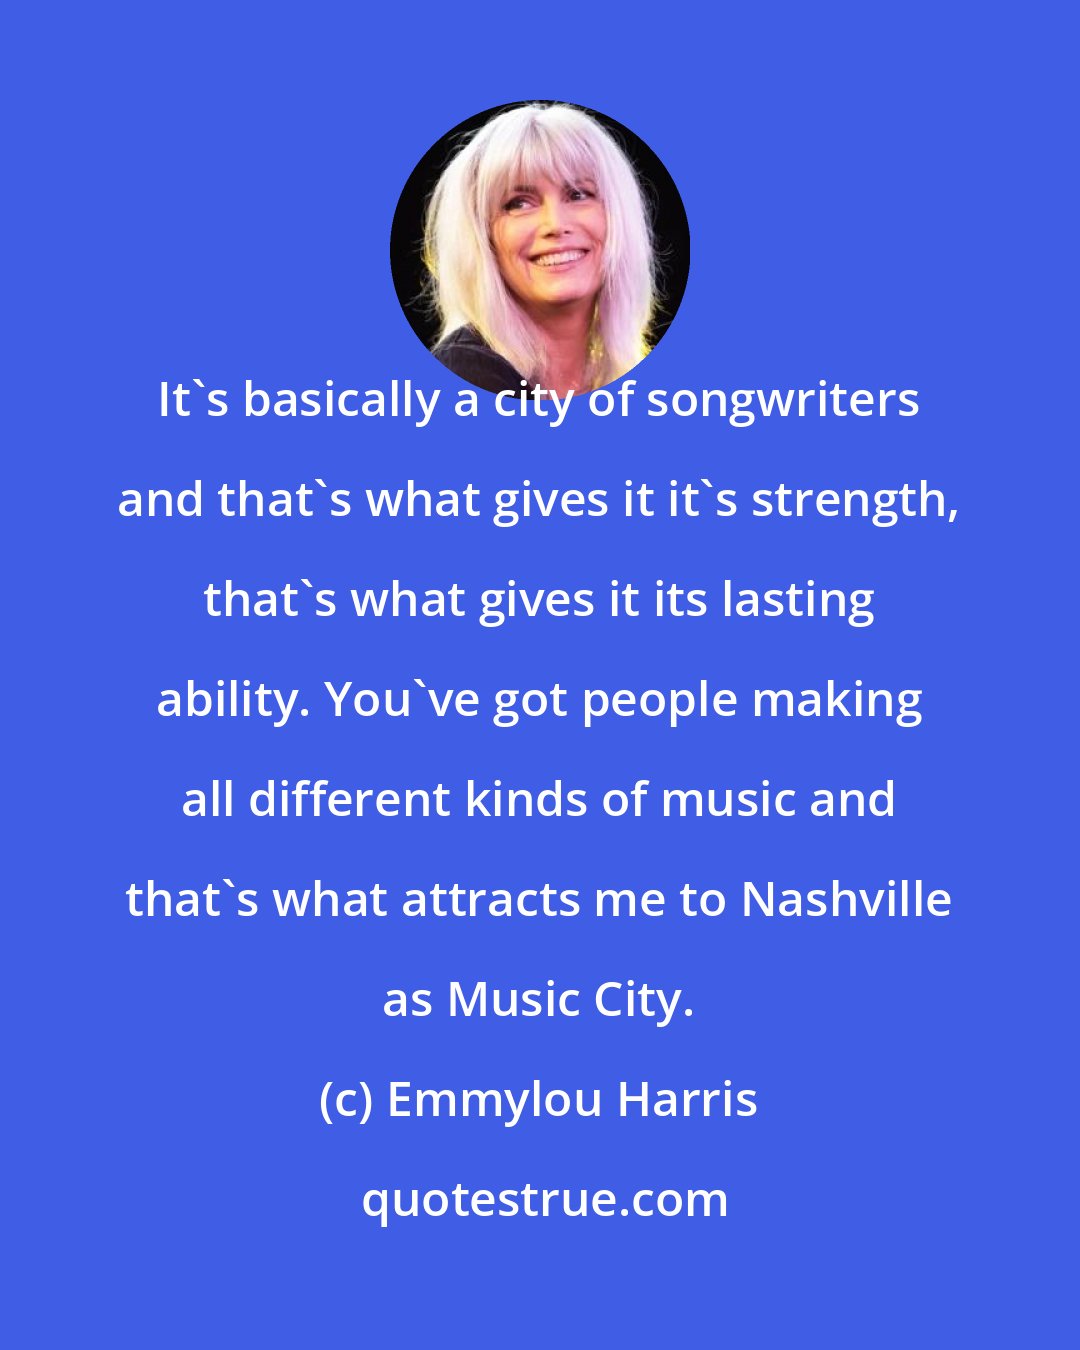 Emmylou Harris: It's basically a city of songwriters and that's what gives it it's strength, that's what gives it its lasting ability. You've got people making all different kinds of music and that's what attracts me to Nashville as Music City.